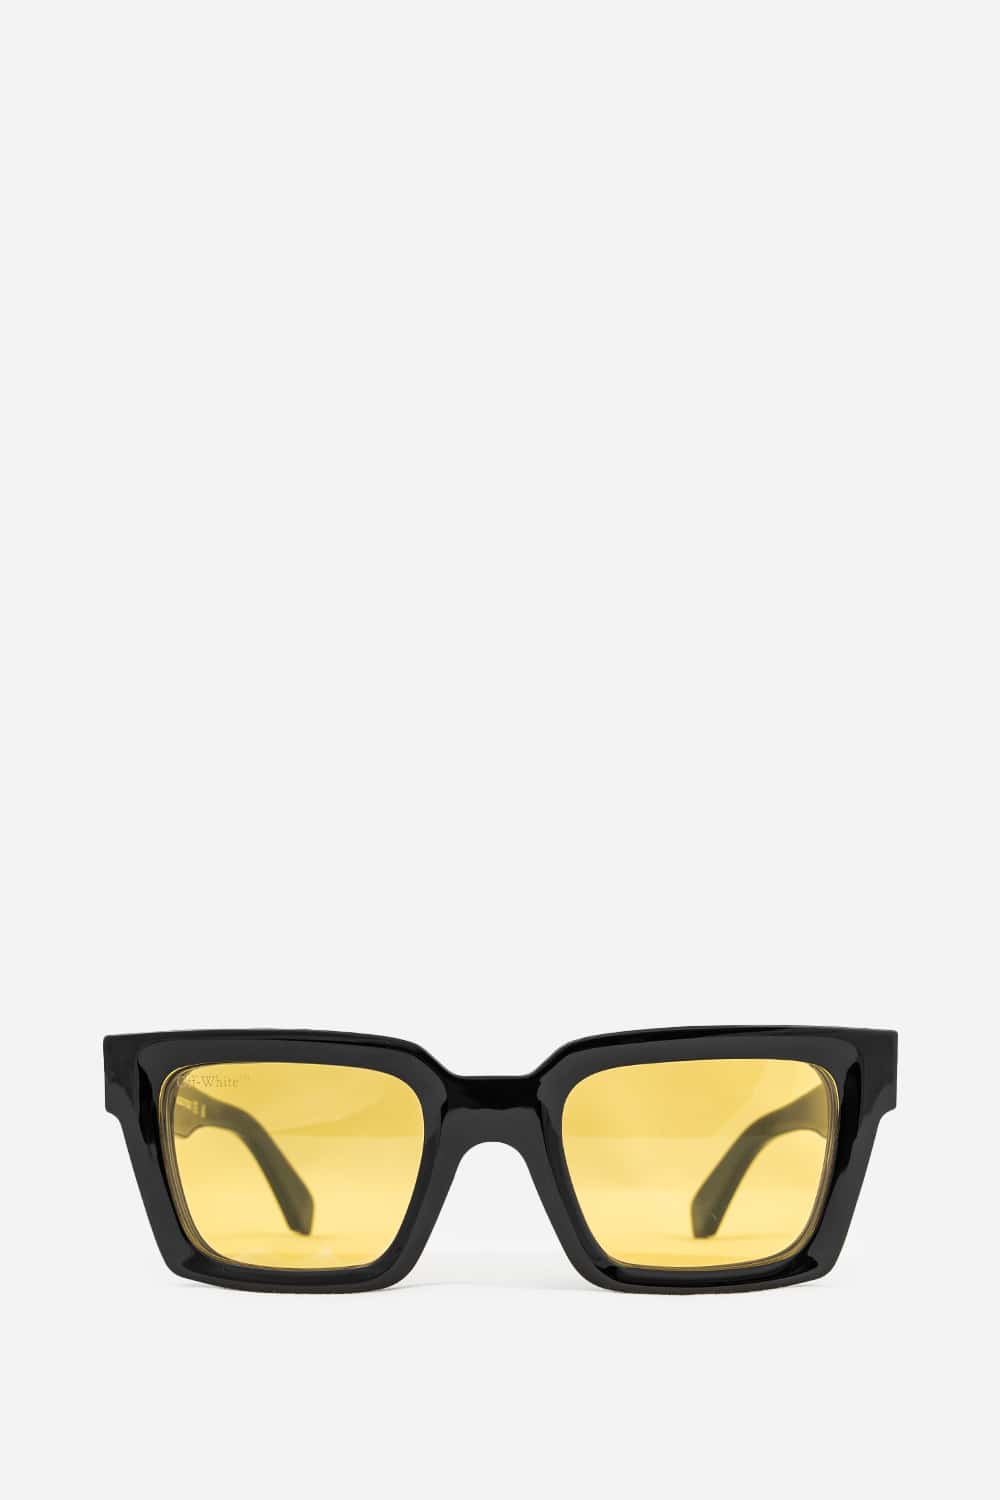 OFF-WHITE Clip On Black Yellow 0mm New Sunglasses